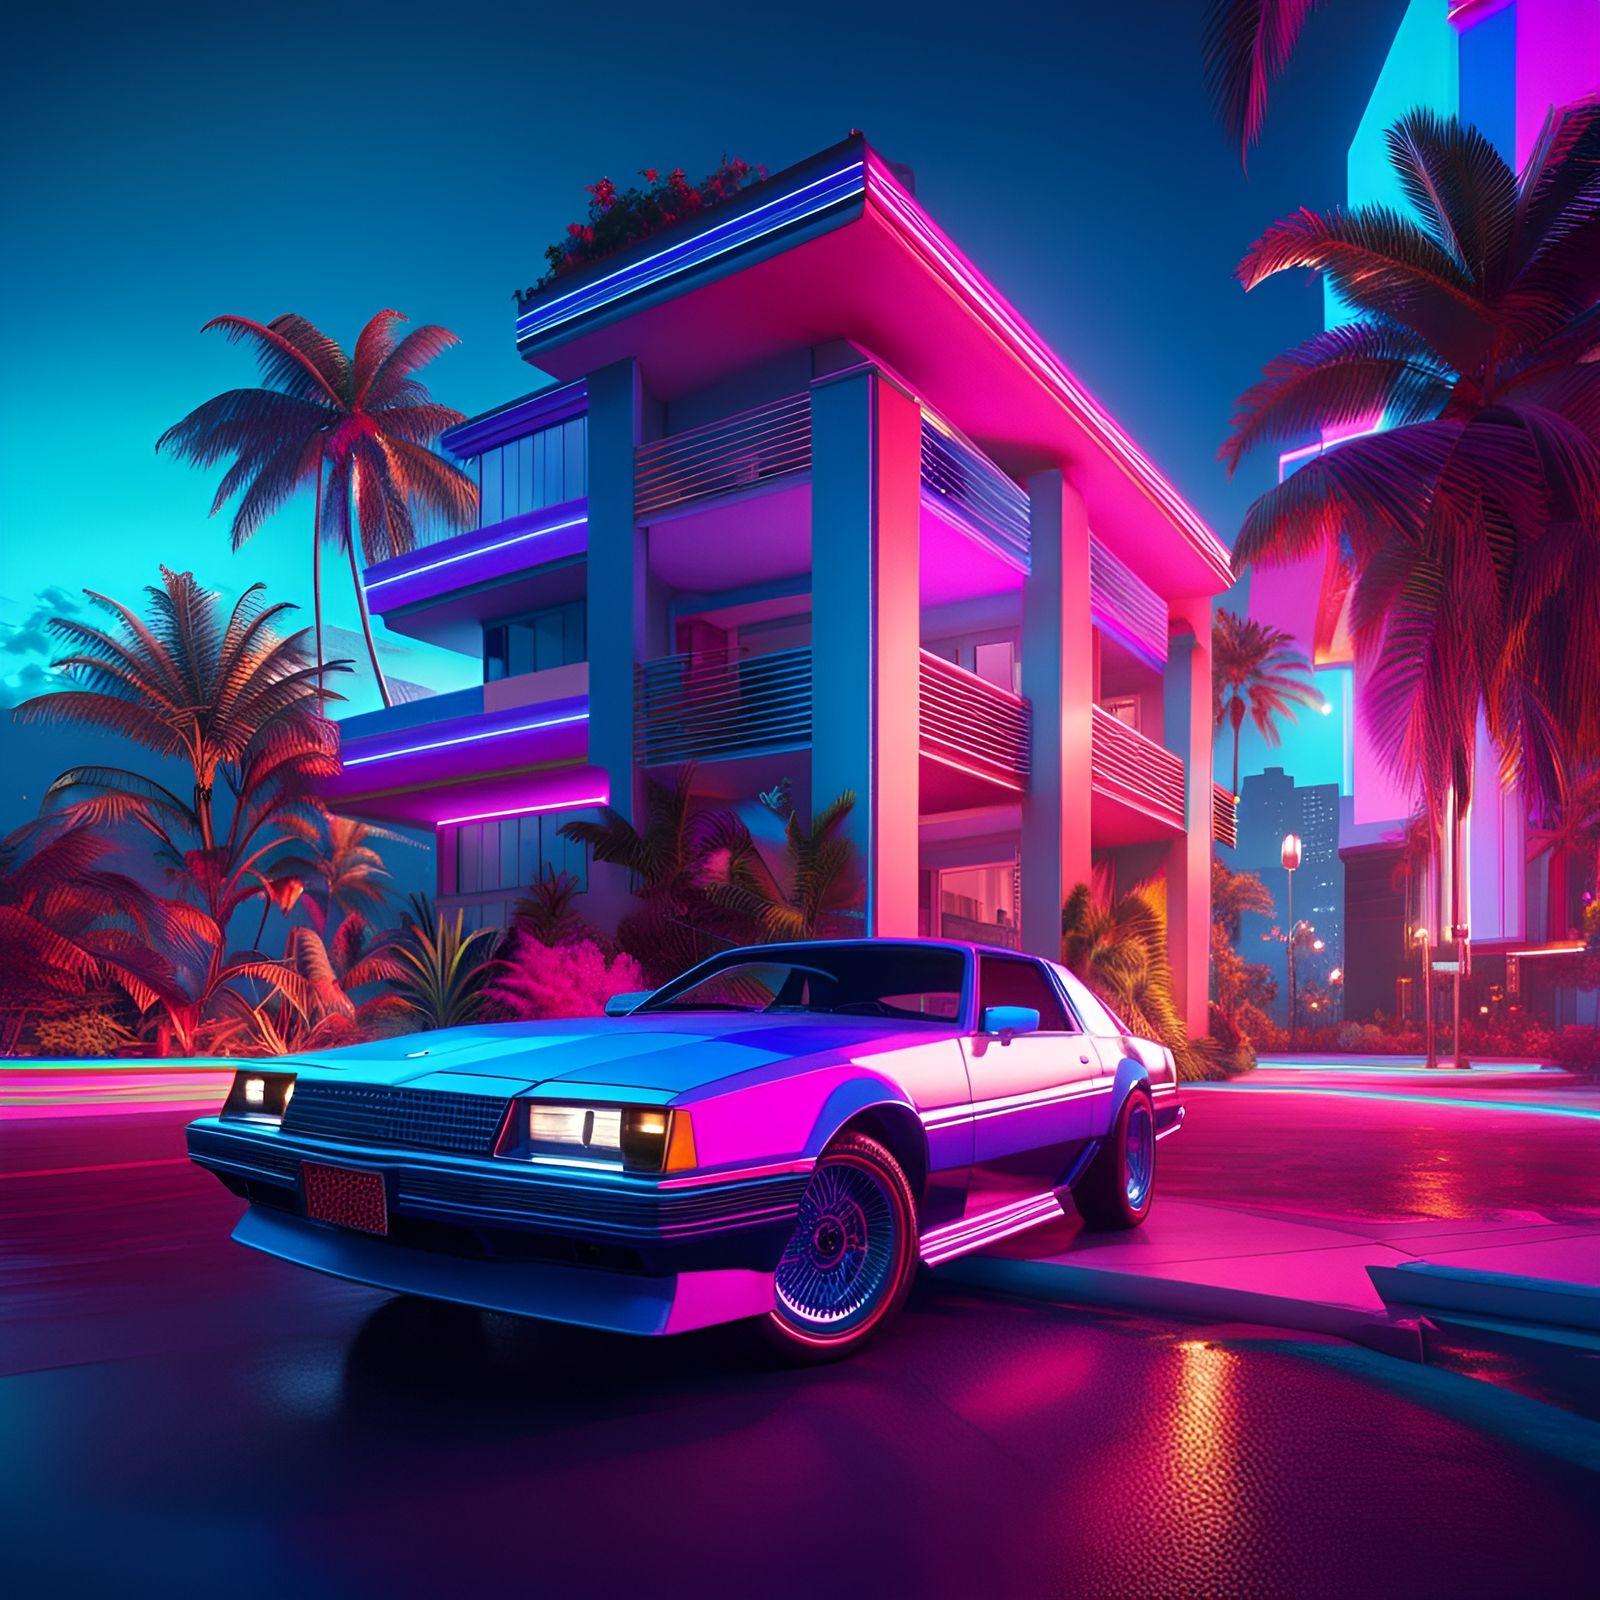 Gallery: How to Make The “Miami Vice” Style Work Today